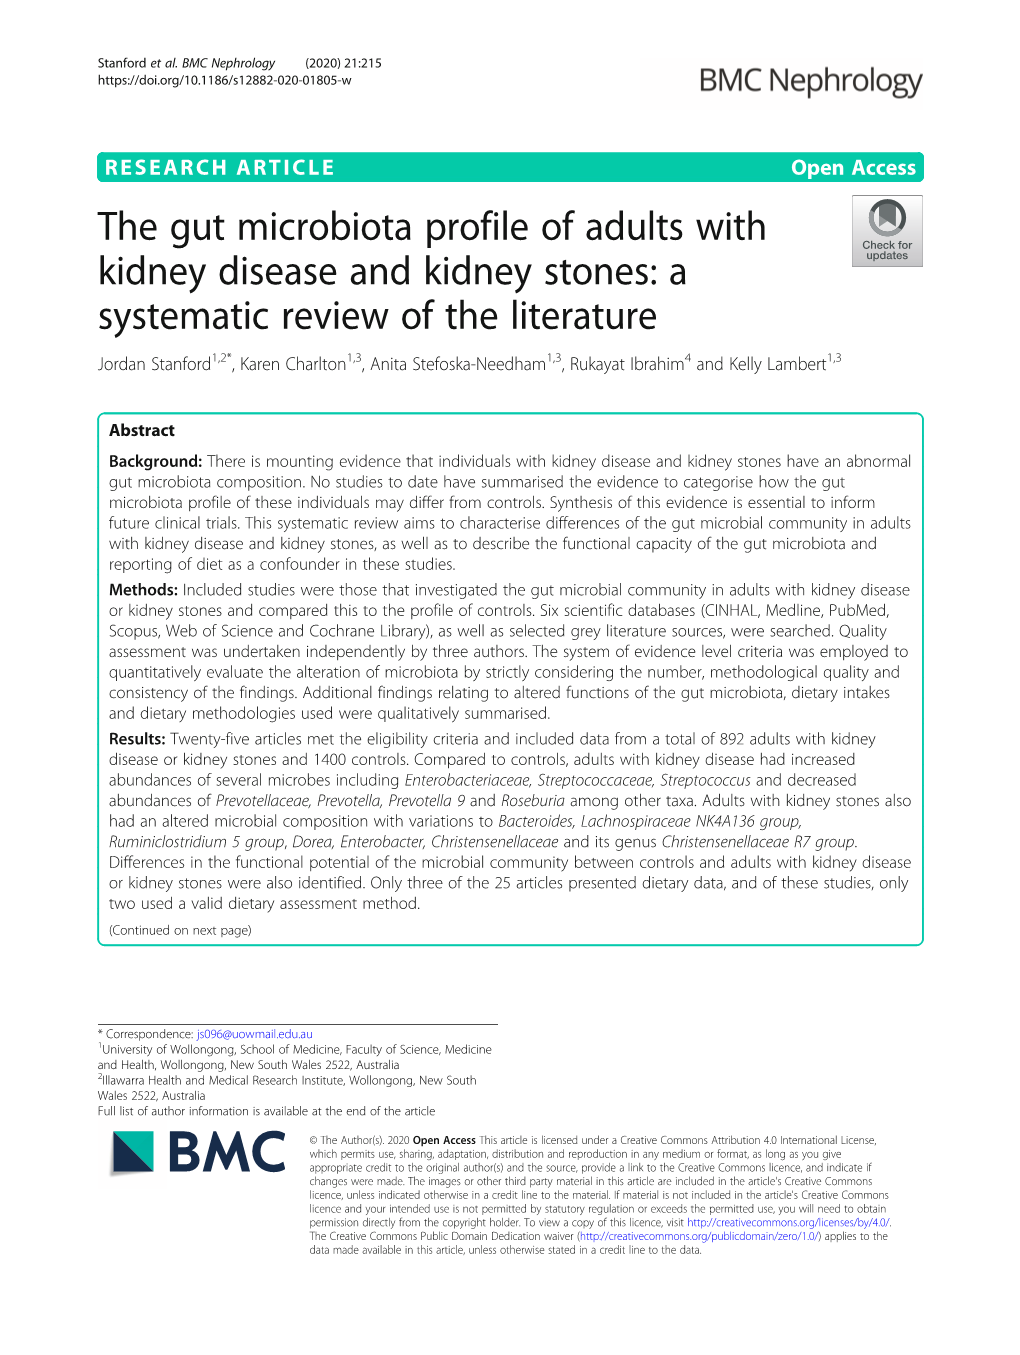 The Gut Microbiota Profile of Adults with Kidney